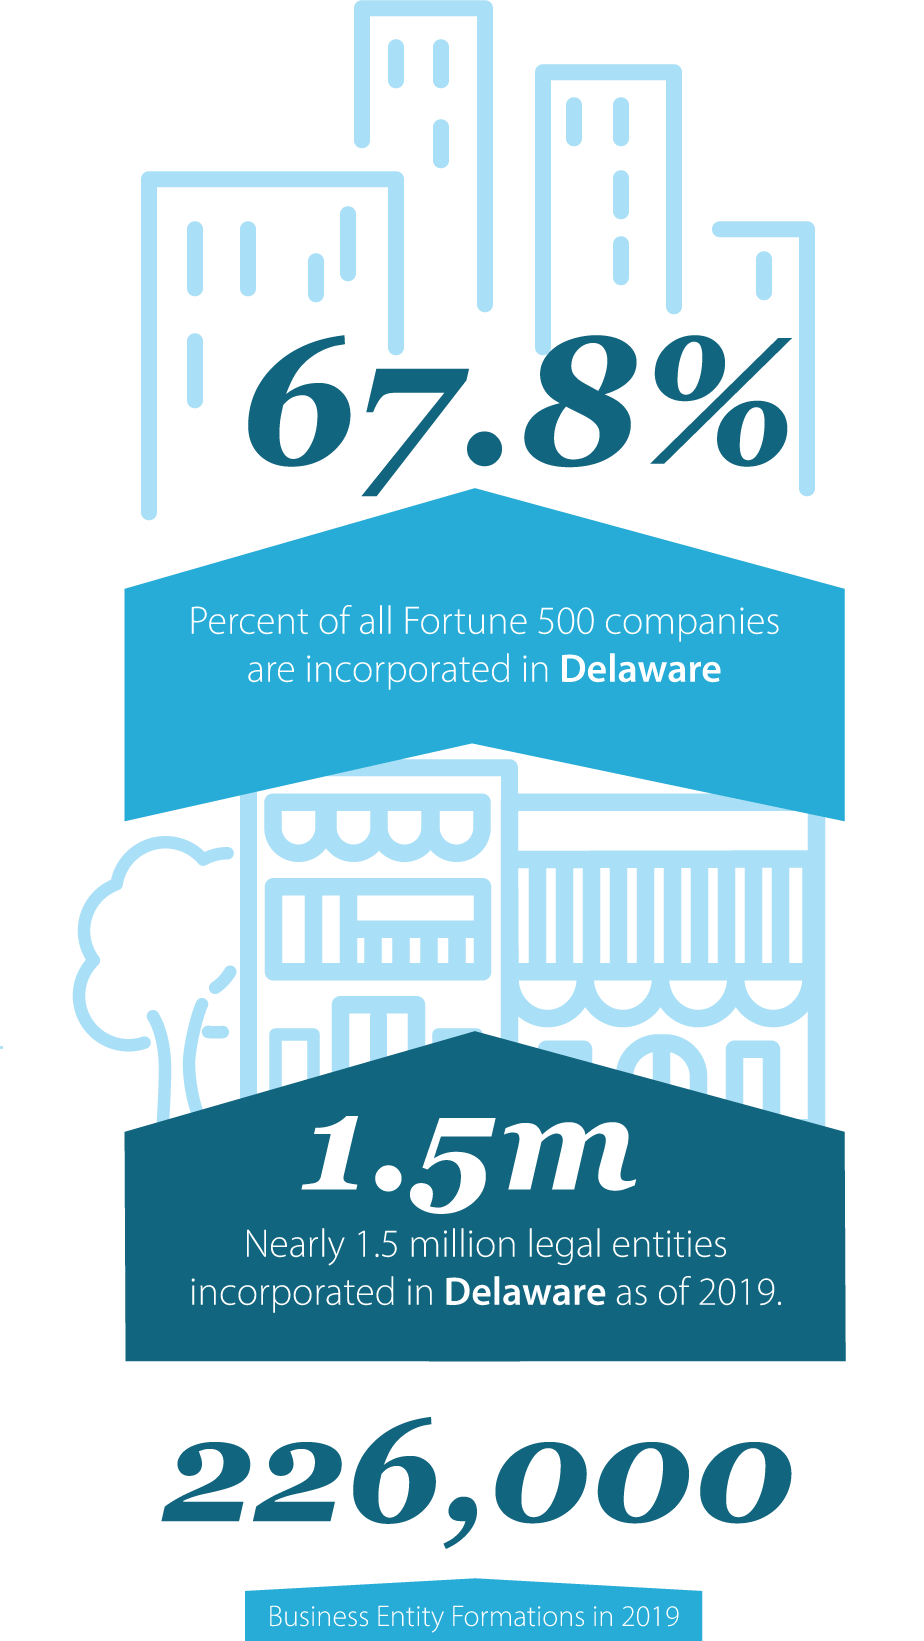 Image representing 68.8 percent of all Fortune 500 companies are incorpated in Delaware and more than 1.5 million legal entities are incorporated in Delaware.